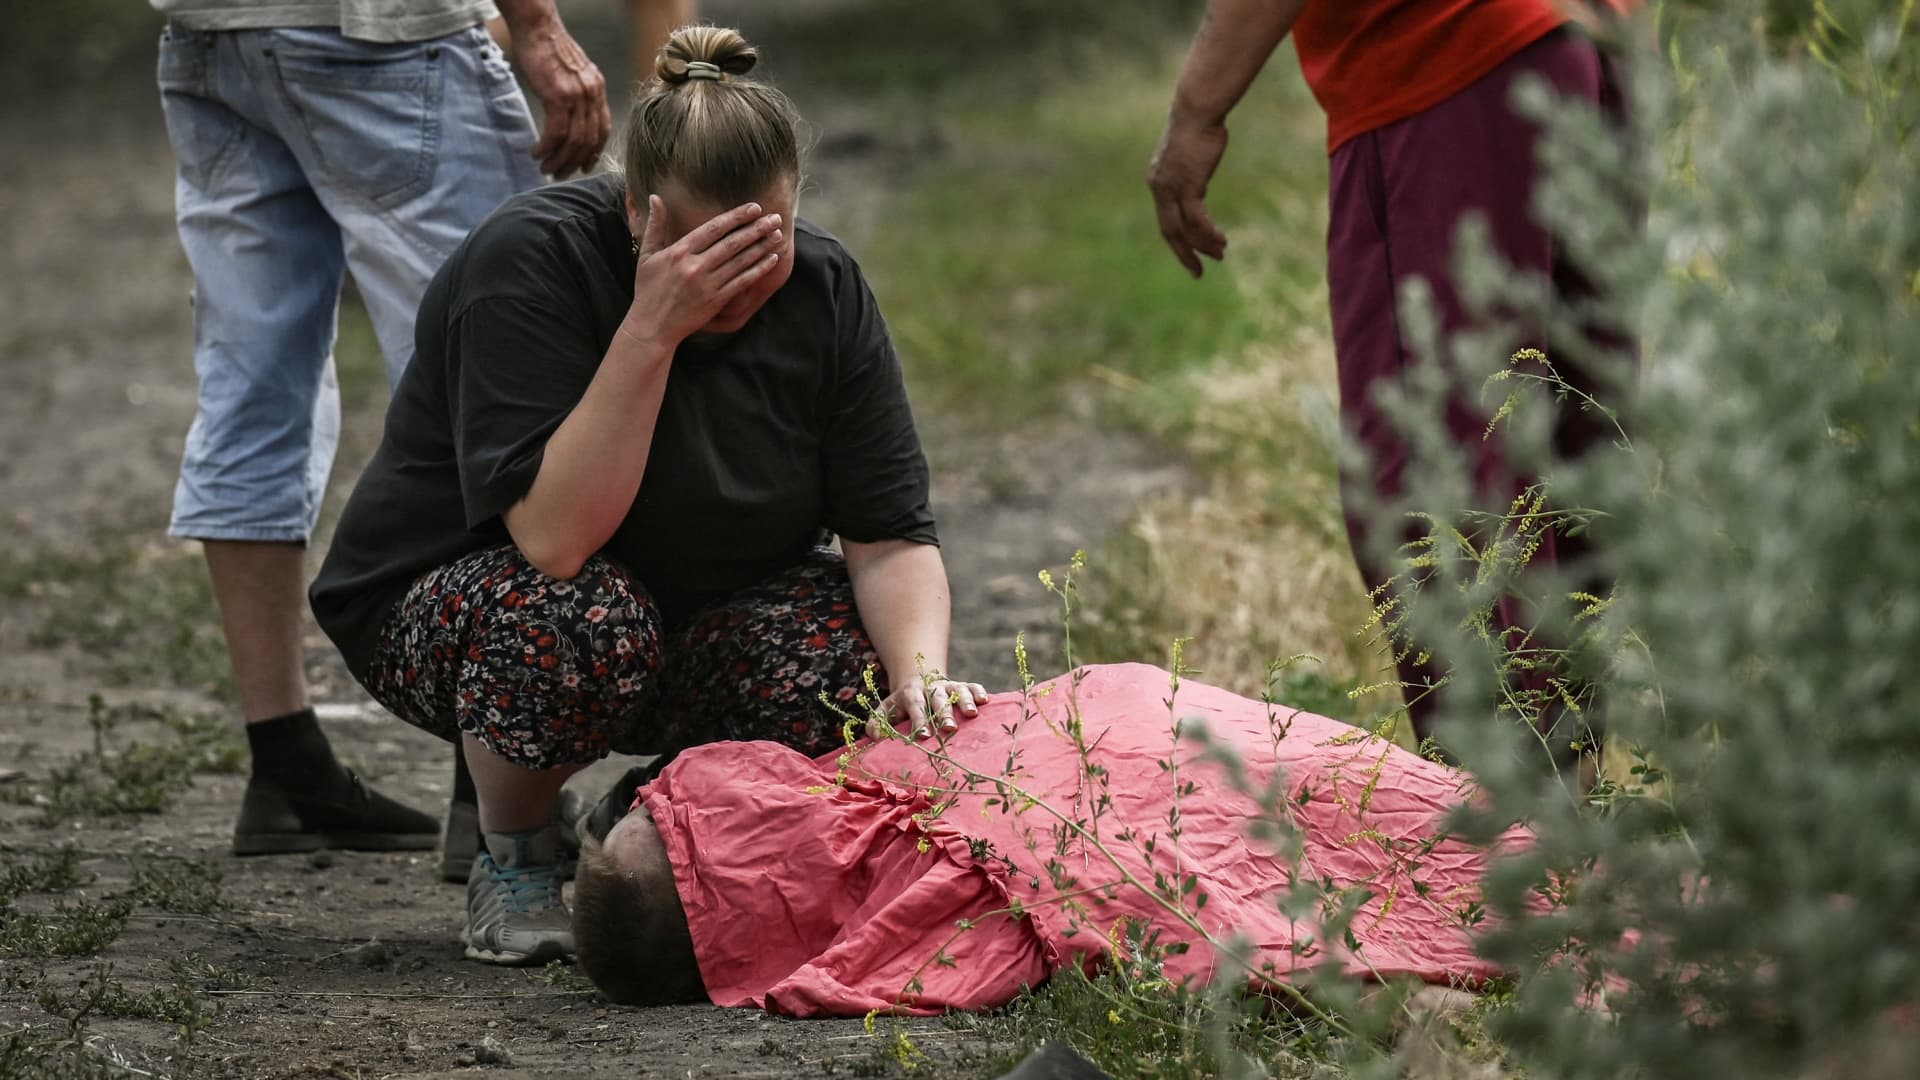 EDITORS NOTE: Graphic content / A woman mourns over the body of her relative who was reportedly killed by a cluster rocket in the city of Lysychansk in the eastern Ukrainian region of Donbas on June 18, 2022 amid the Russian invasion of the country.